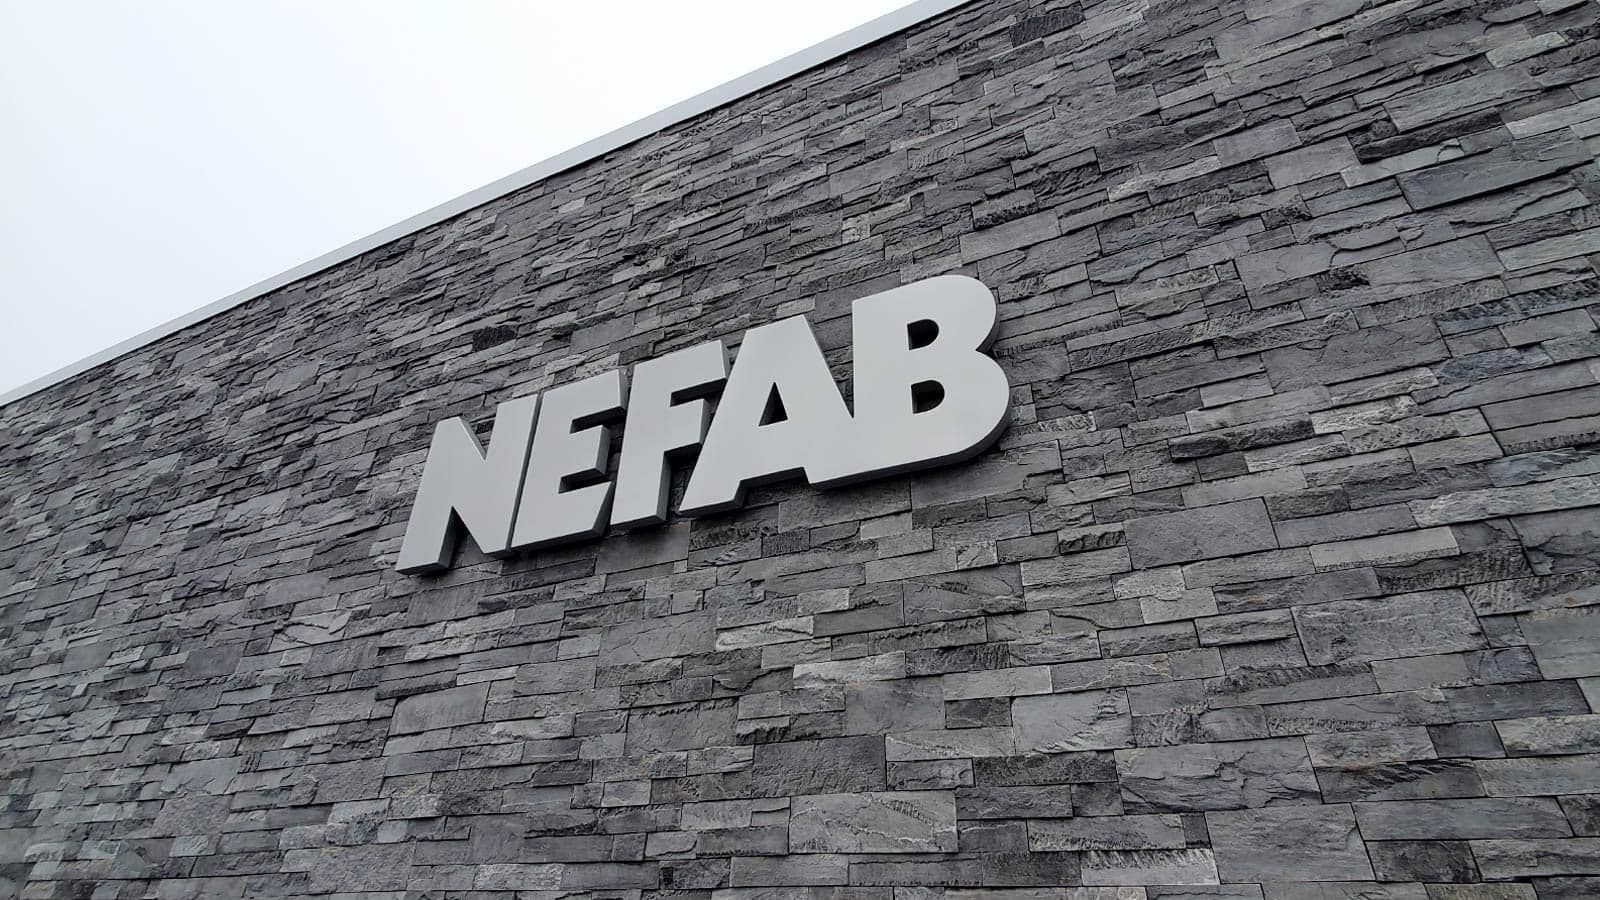 Nefab outdoor sign installed on the facade